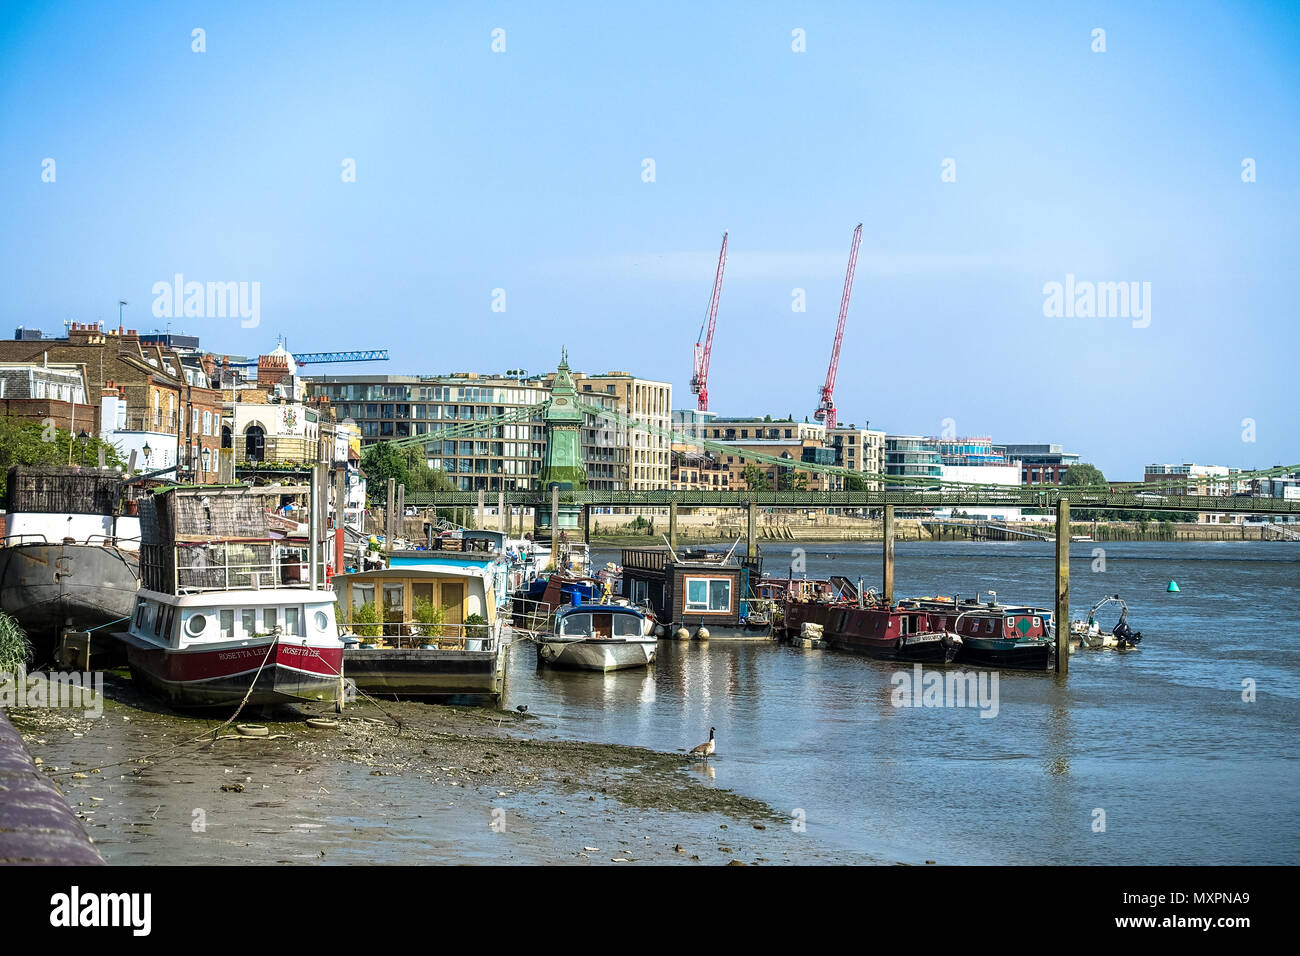 A view looking down The River Thames towards Hammersmith Bridge in London. It is low tide and moored boats are beached on the mud of the river bed. Stock Photo